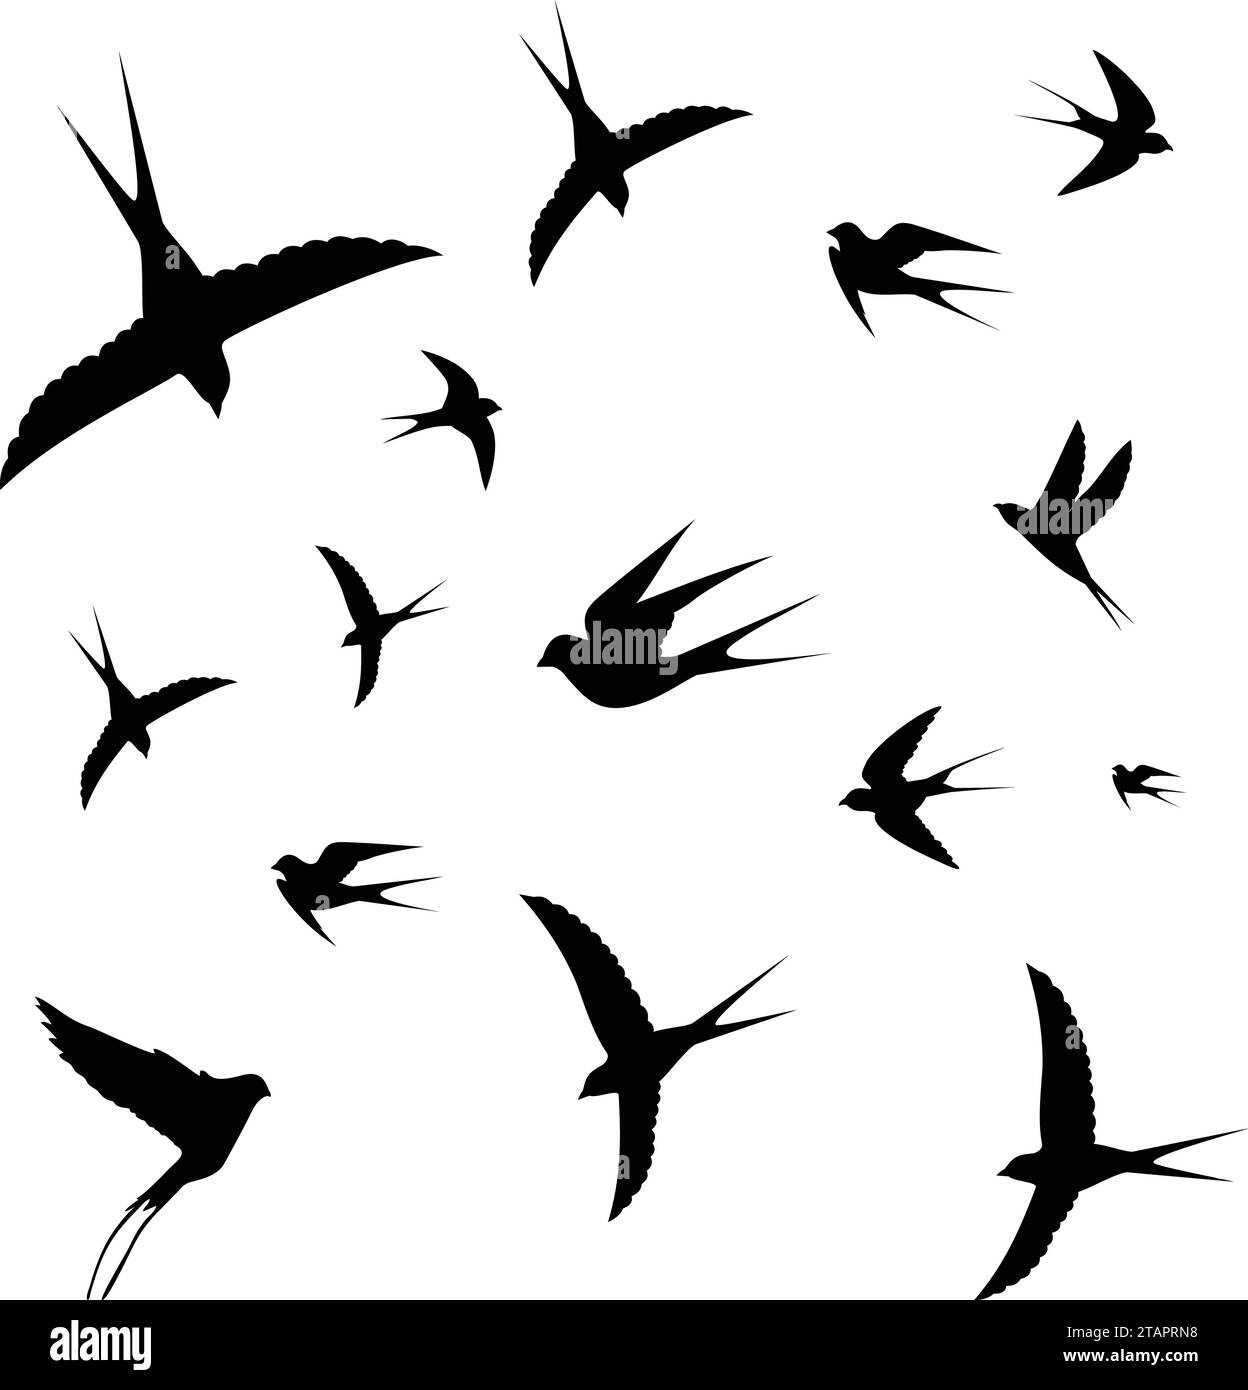 Flying birds silhouettes on white background. Vector illustration. isolated bird flying. tattoo design. Stock Vector